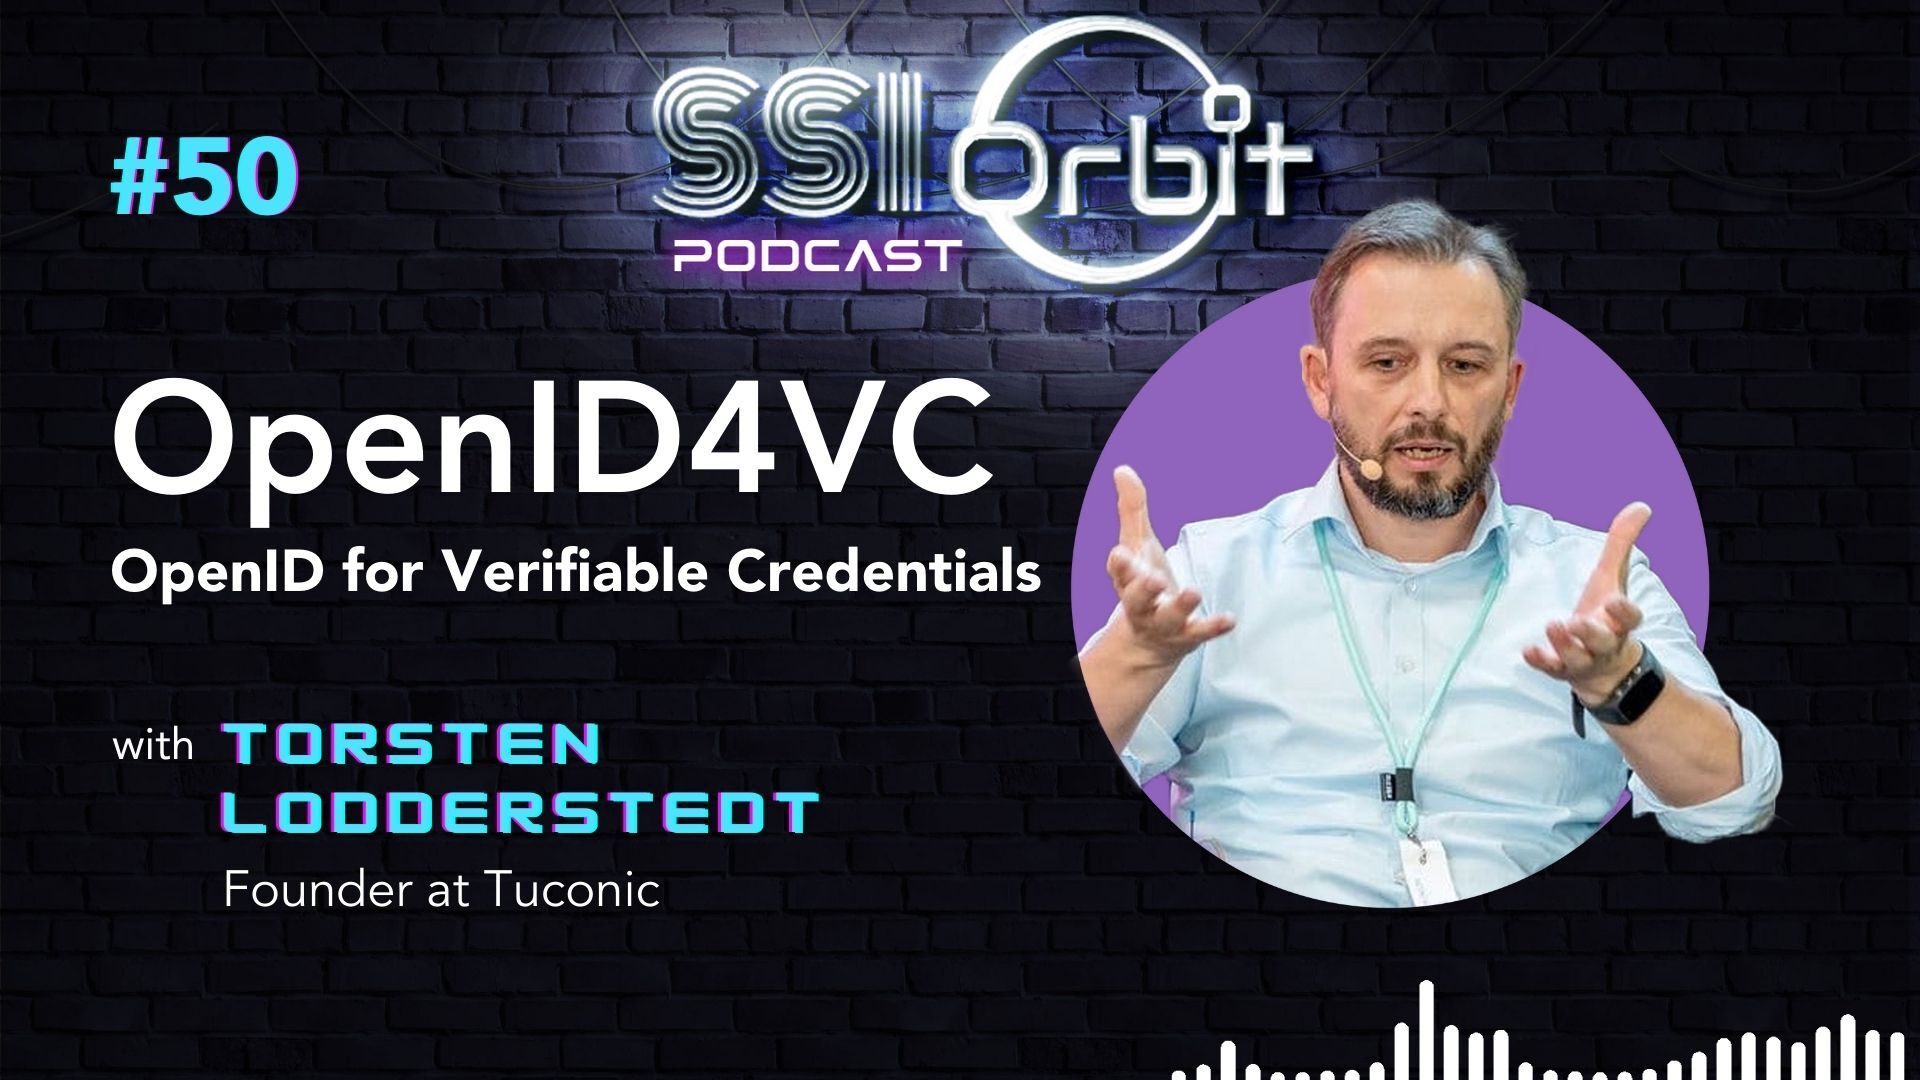 OpenID4VC: OpenID for Verifiable Credentials (with Torsten Lodderstedt)